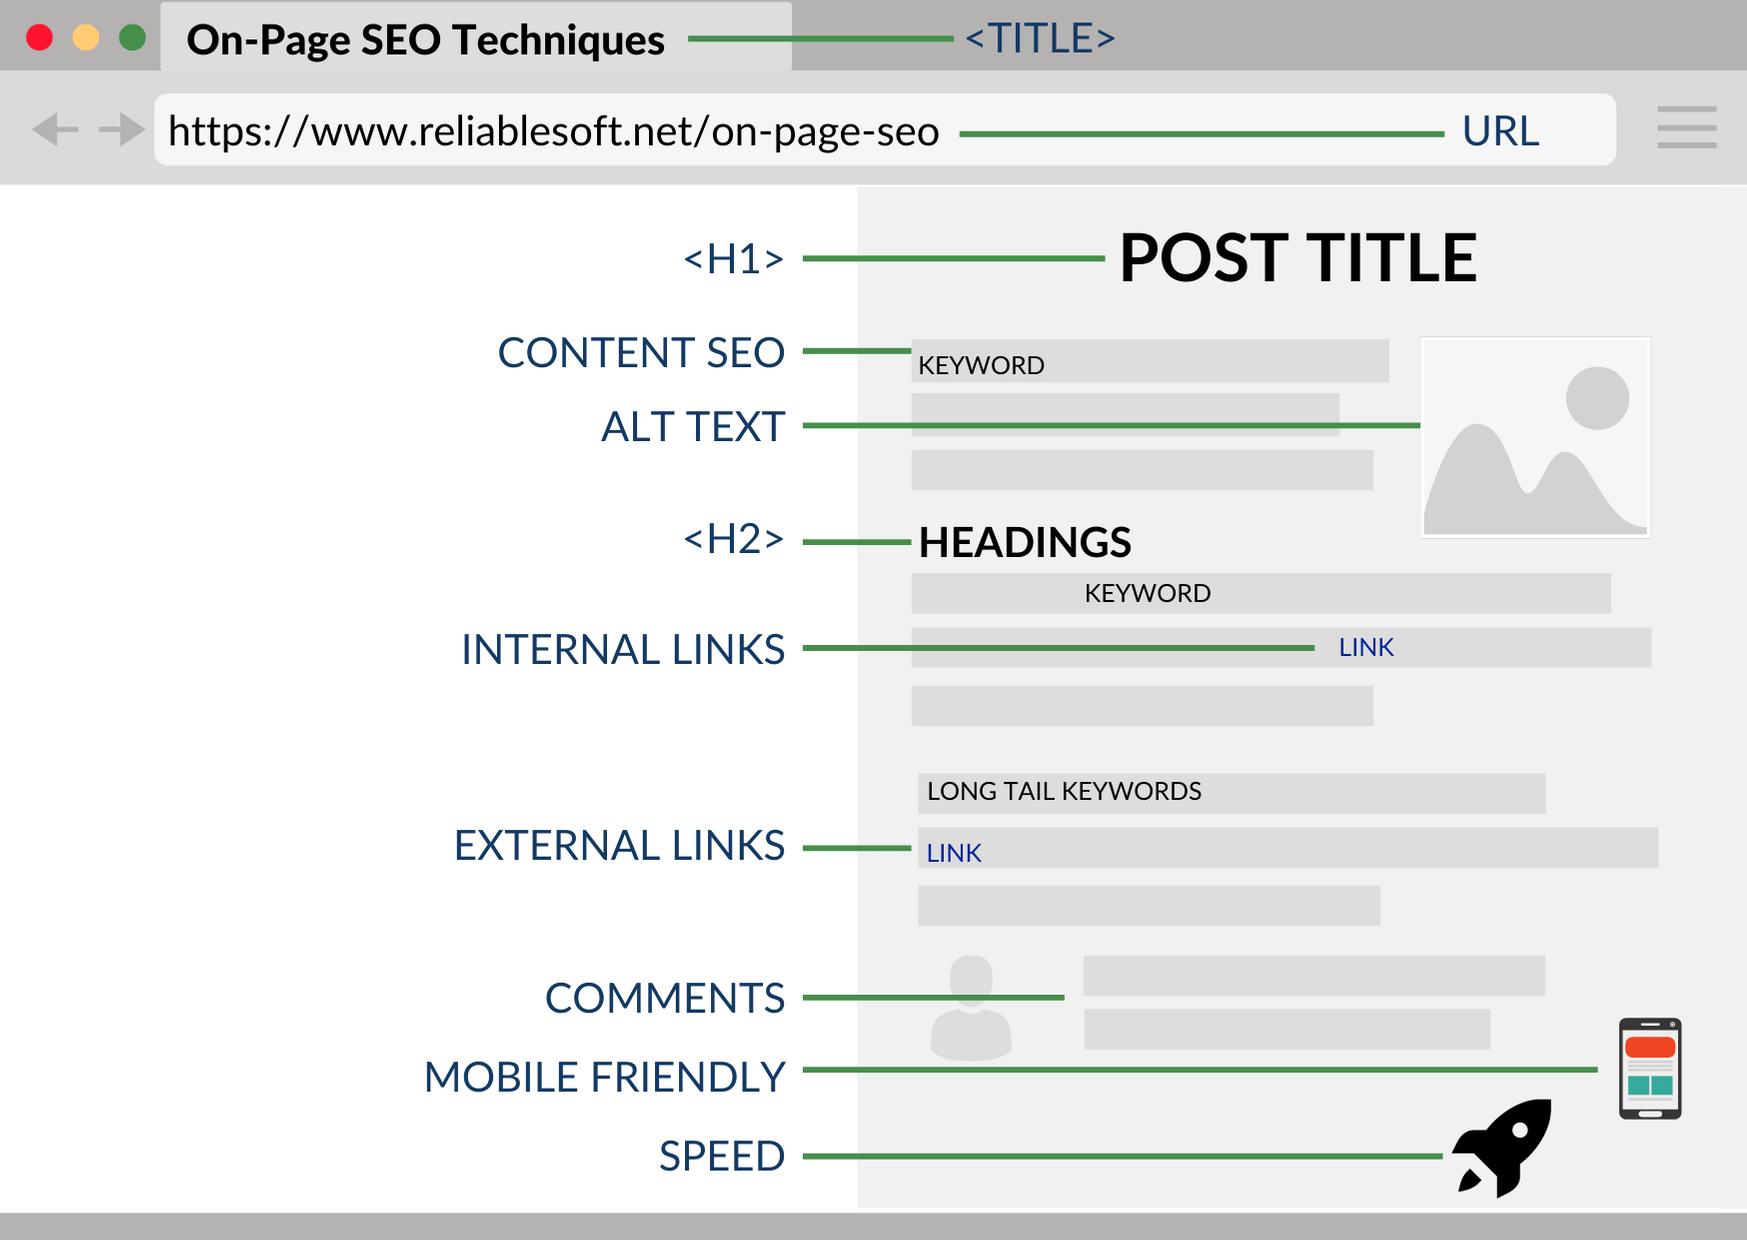 On-Page SEO: What It Is and How to Do It